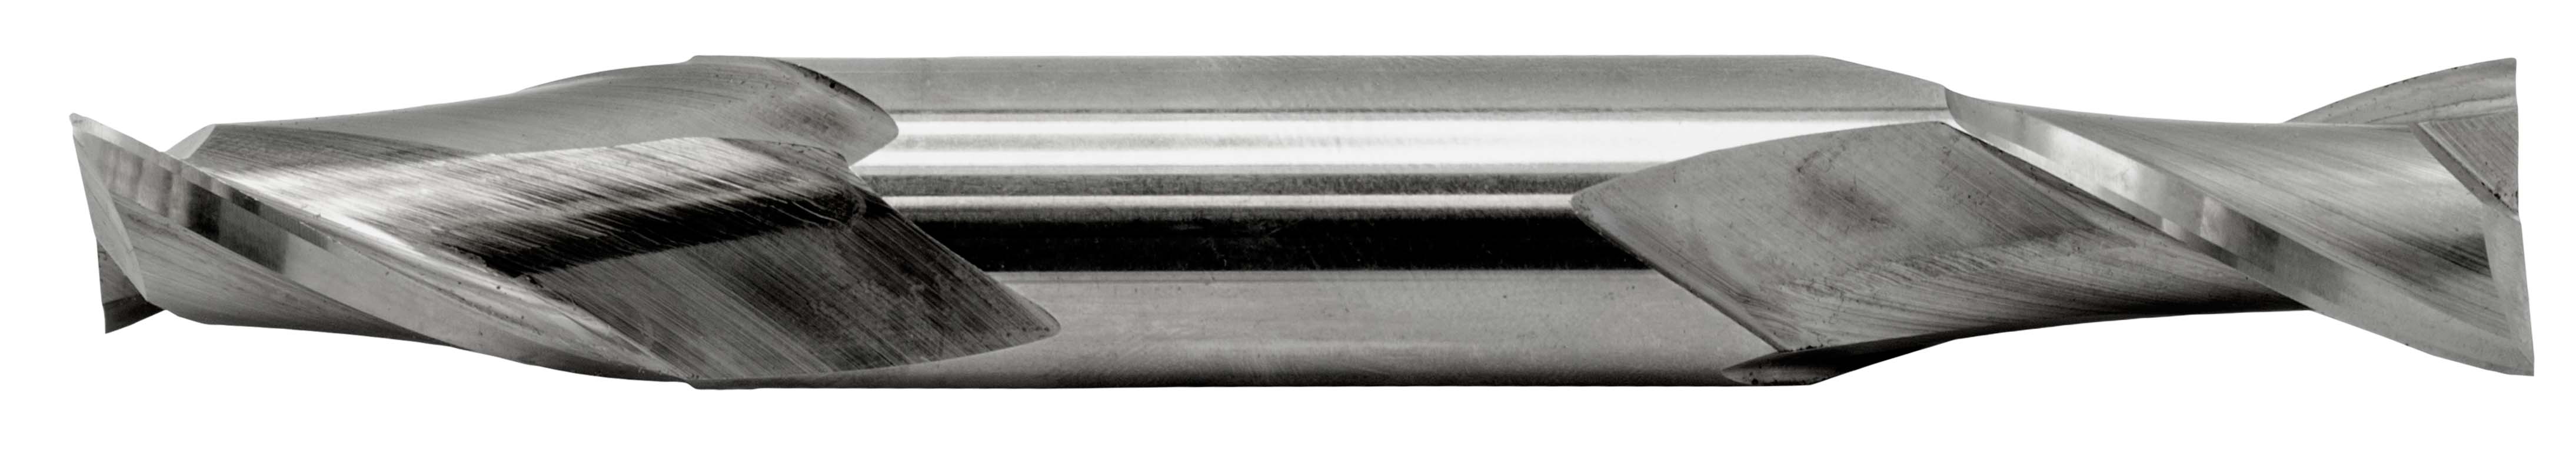 11/16" High Speed Steel End Mill Double End- 2FL 1